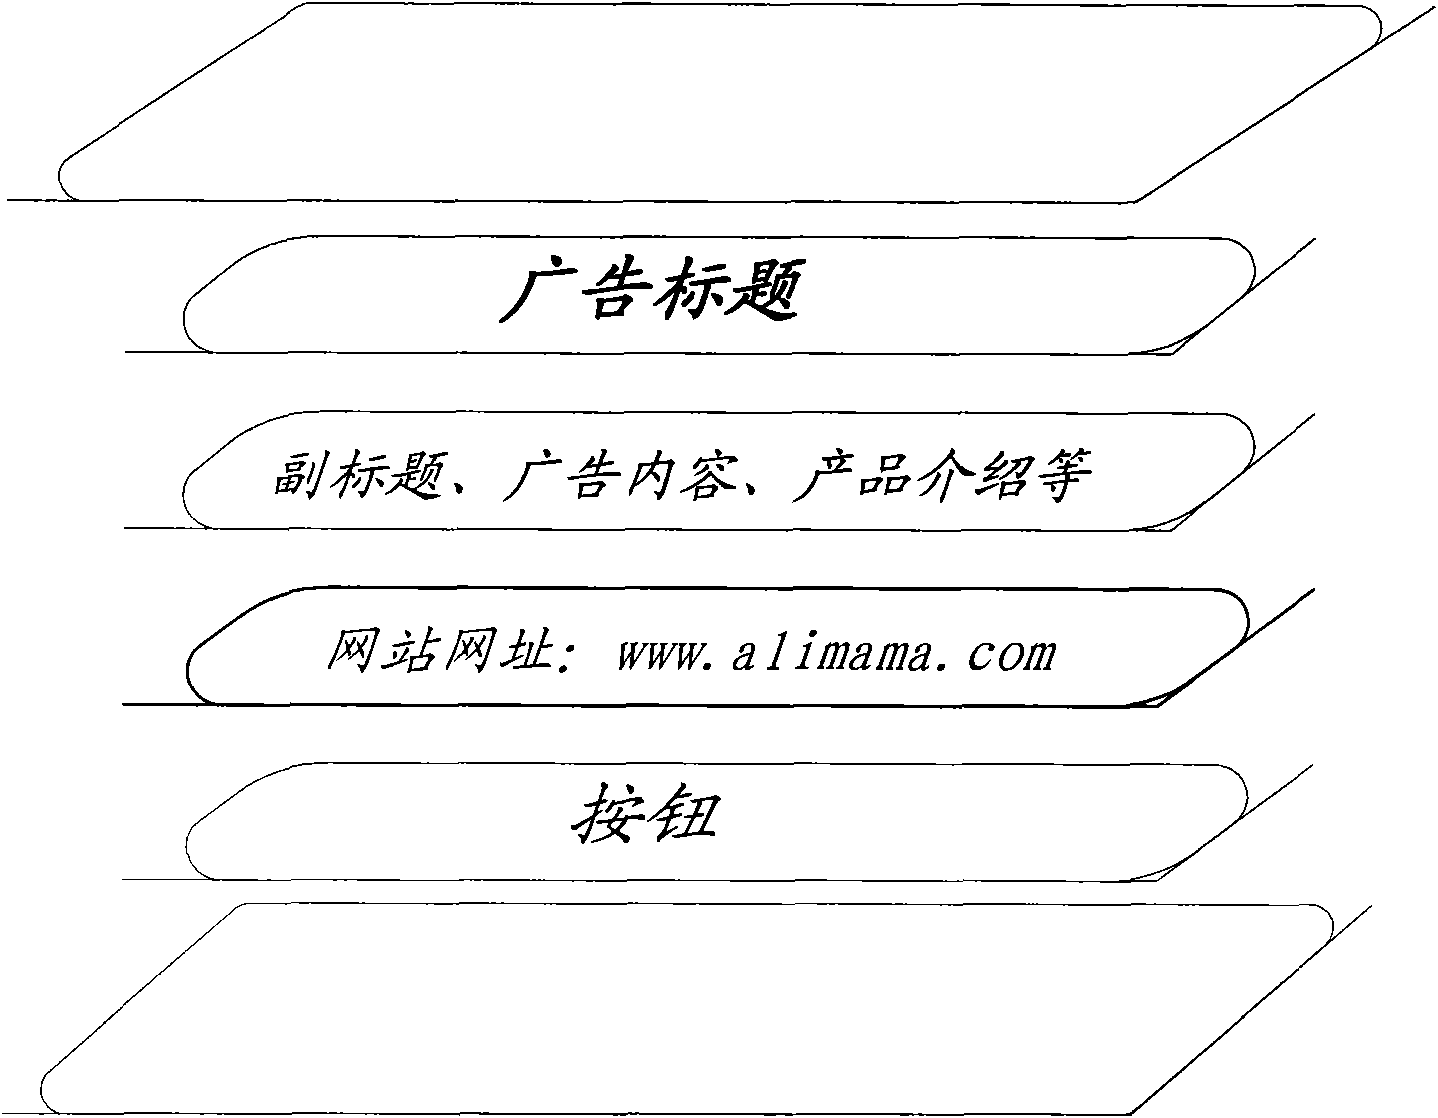 Method and system for advertisement generation and display and advertisement production and display client